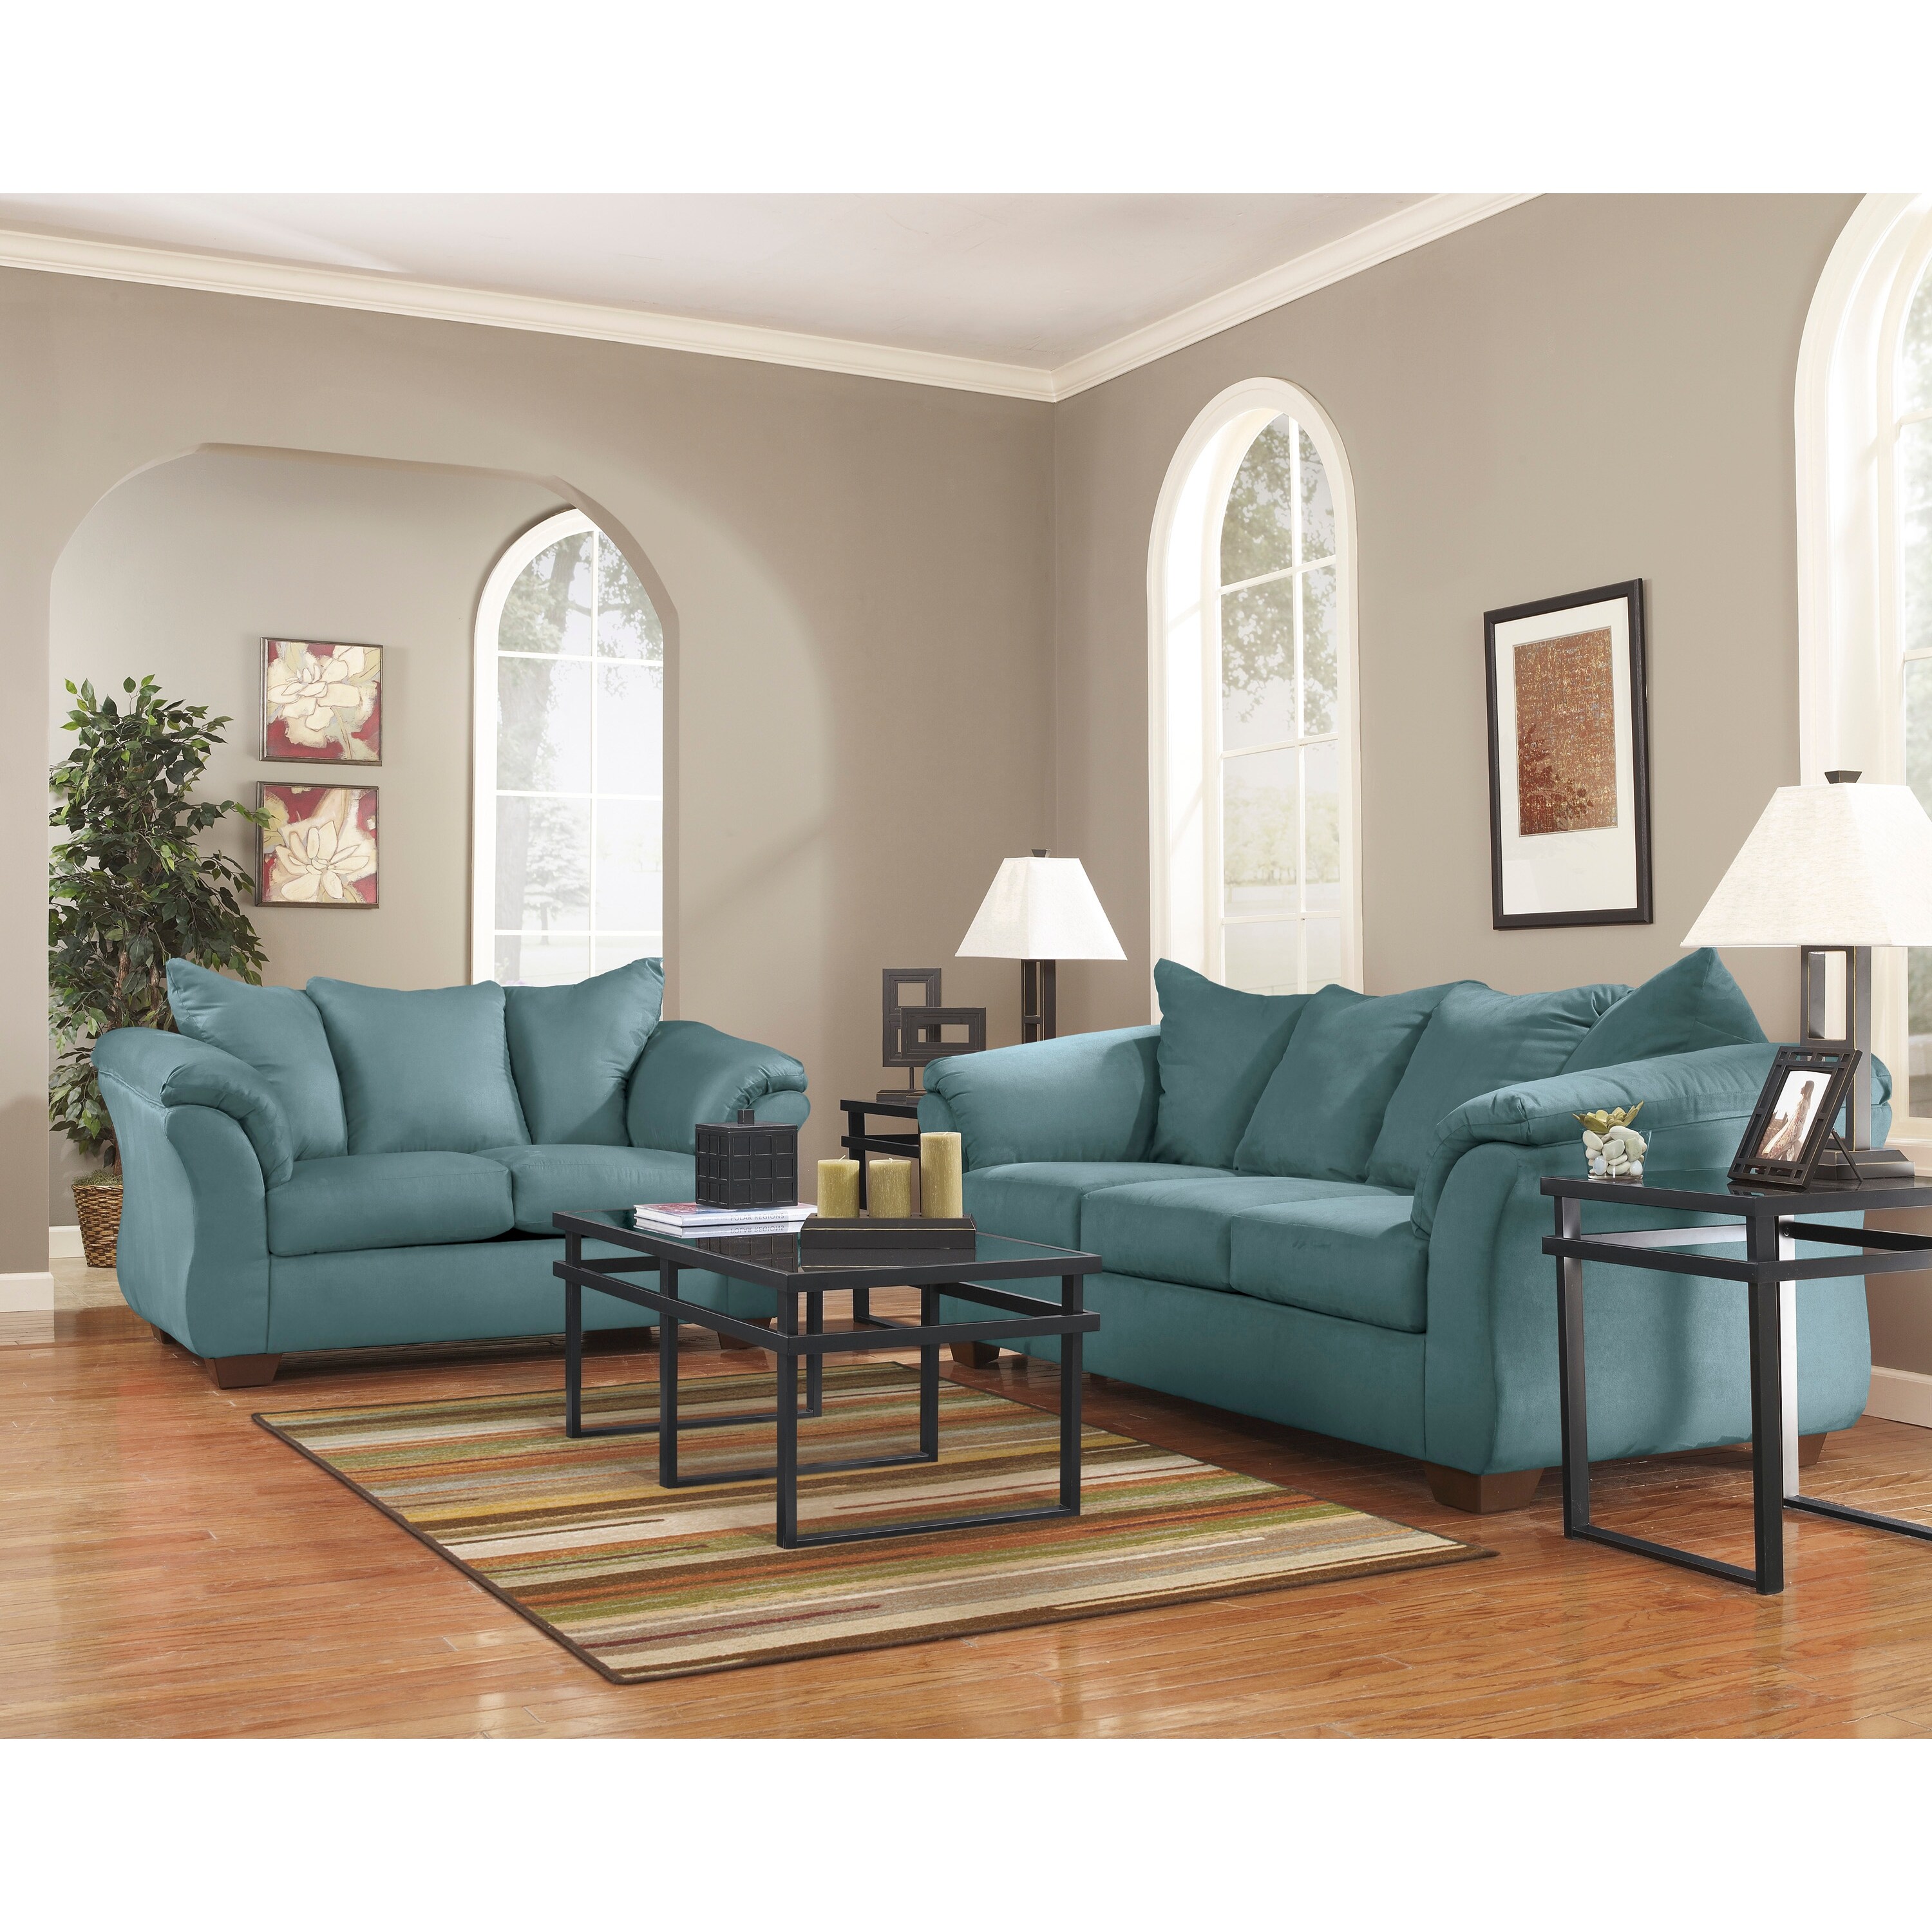 Signature Design By Ashley Darcy Living Room Set In Fabric 67